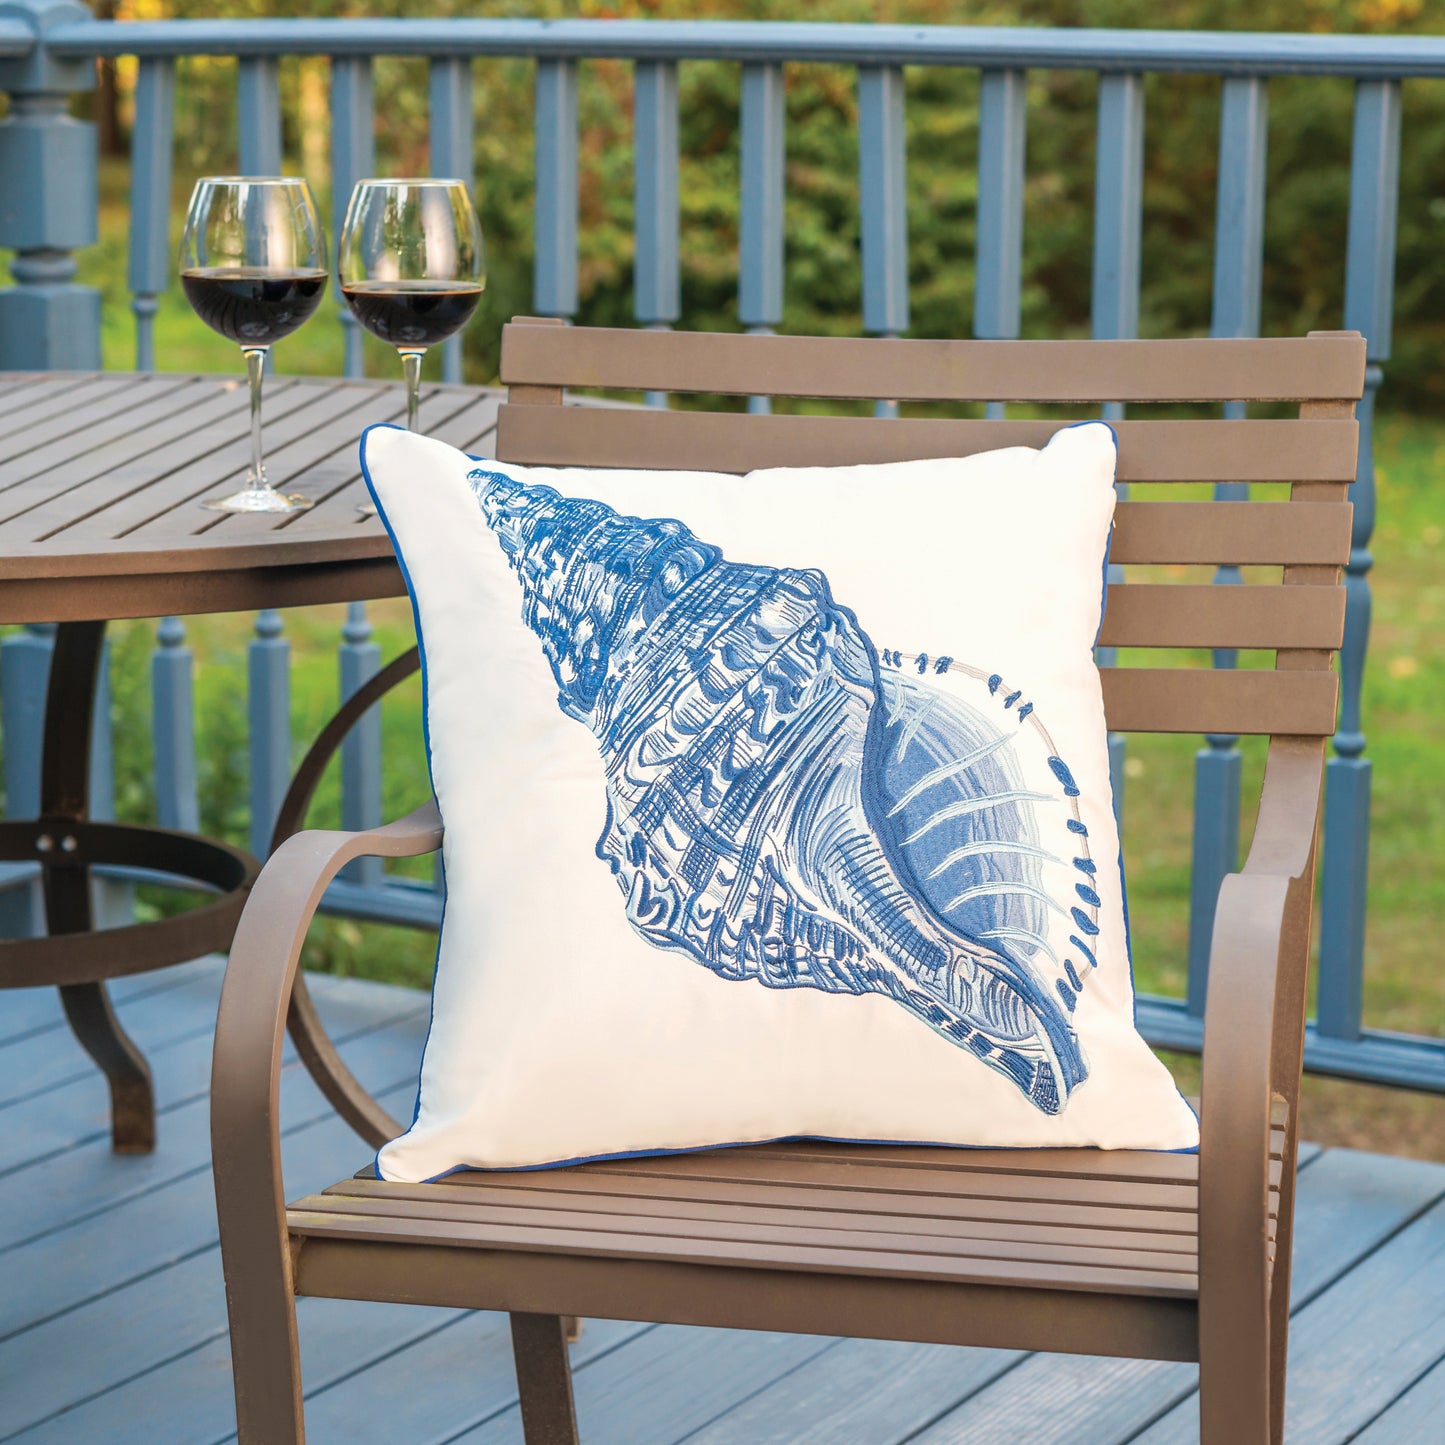 Blue Conch Shell pillow styled on an outdoor patio chair.